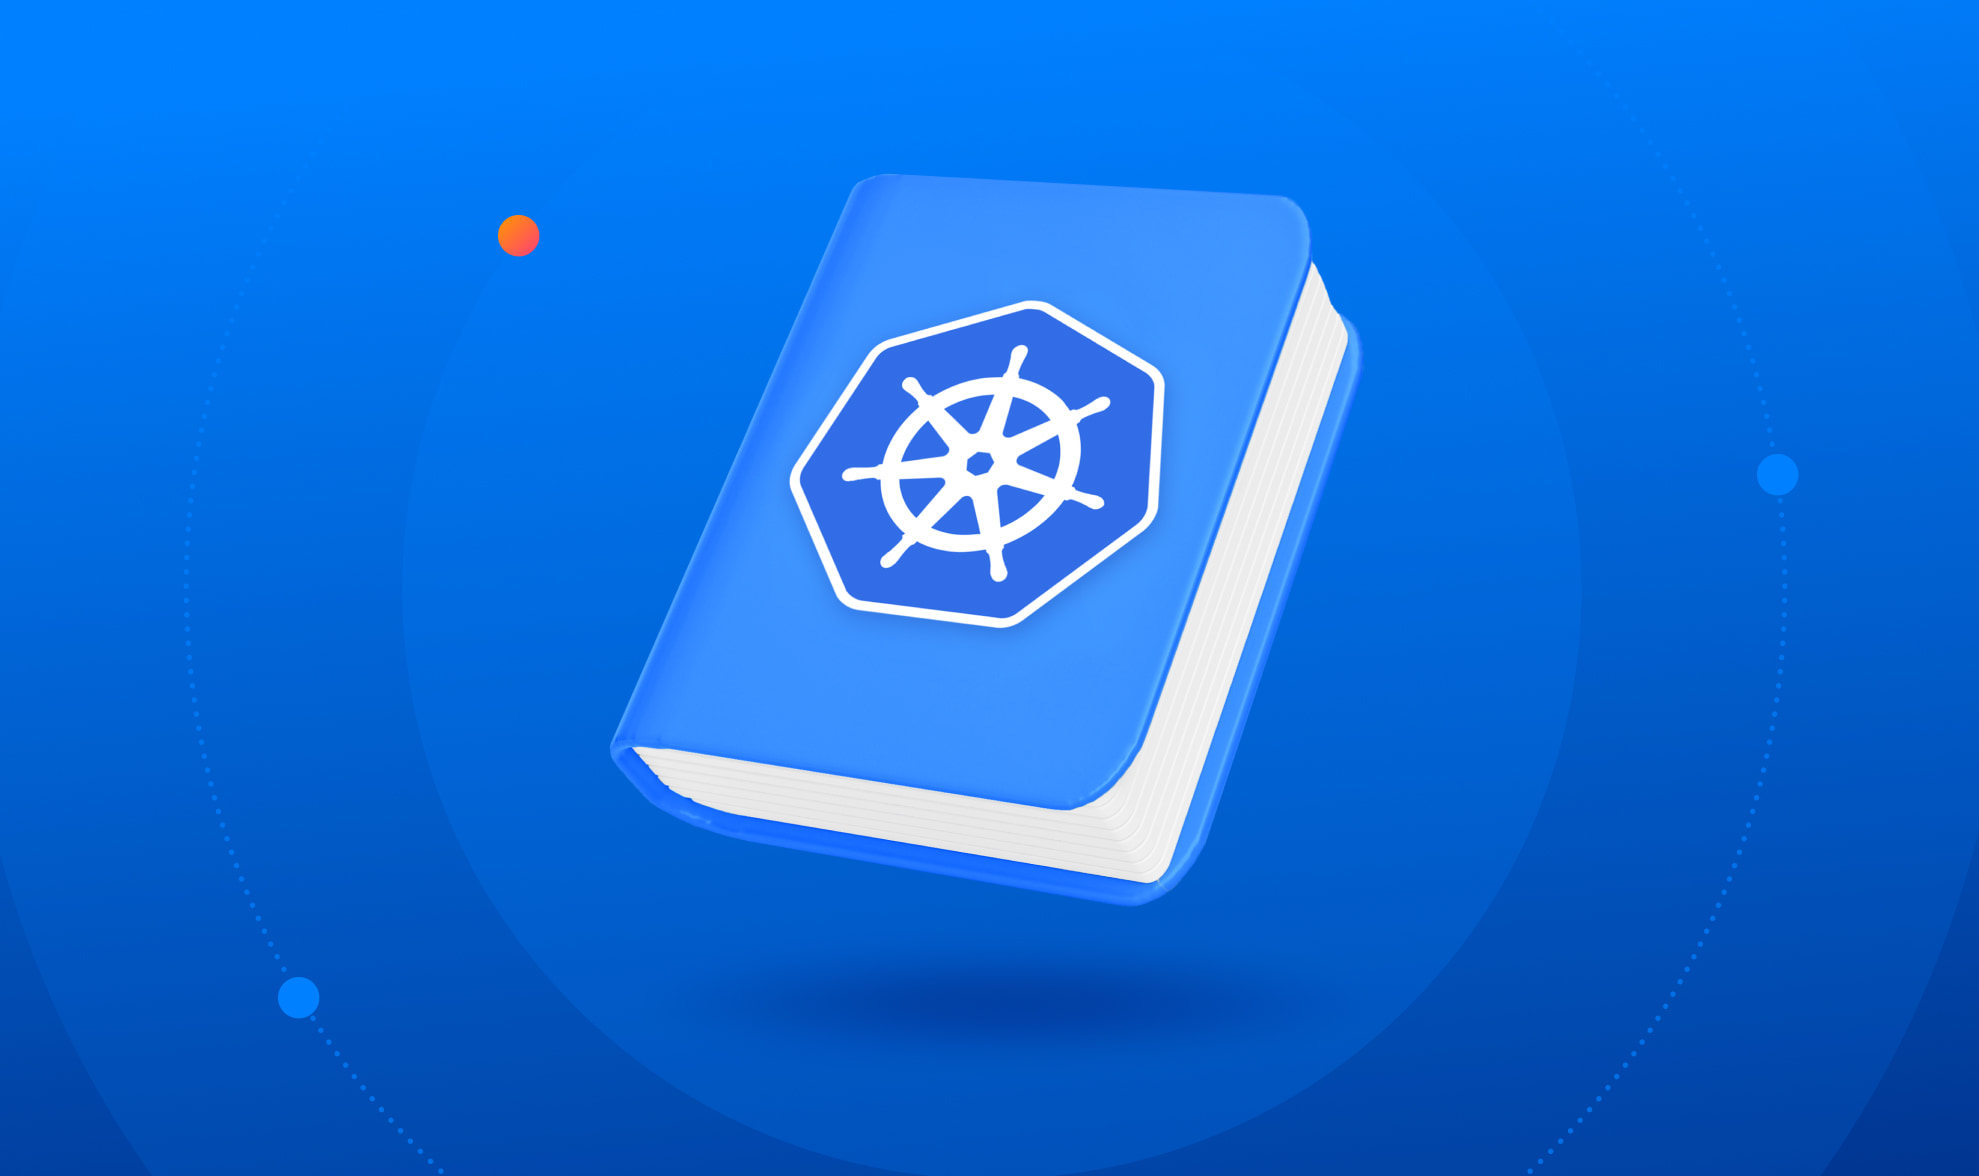 This Kubernetes Hardening Guide addresses security challenges and suggests hardening strategies for four major areas of Kubernetes security.